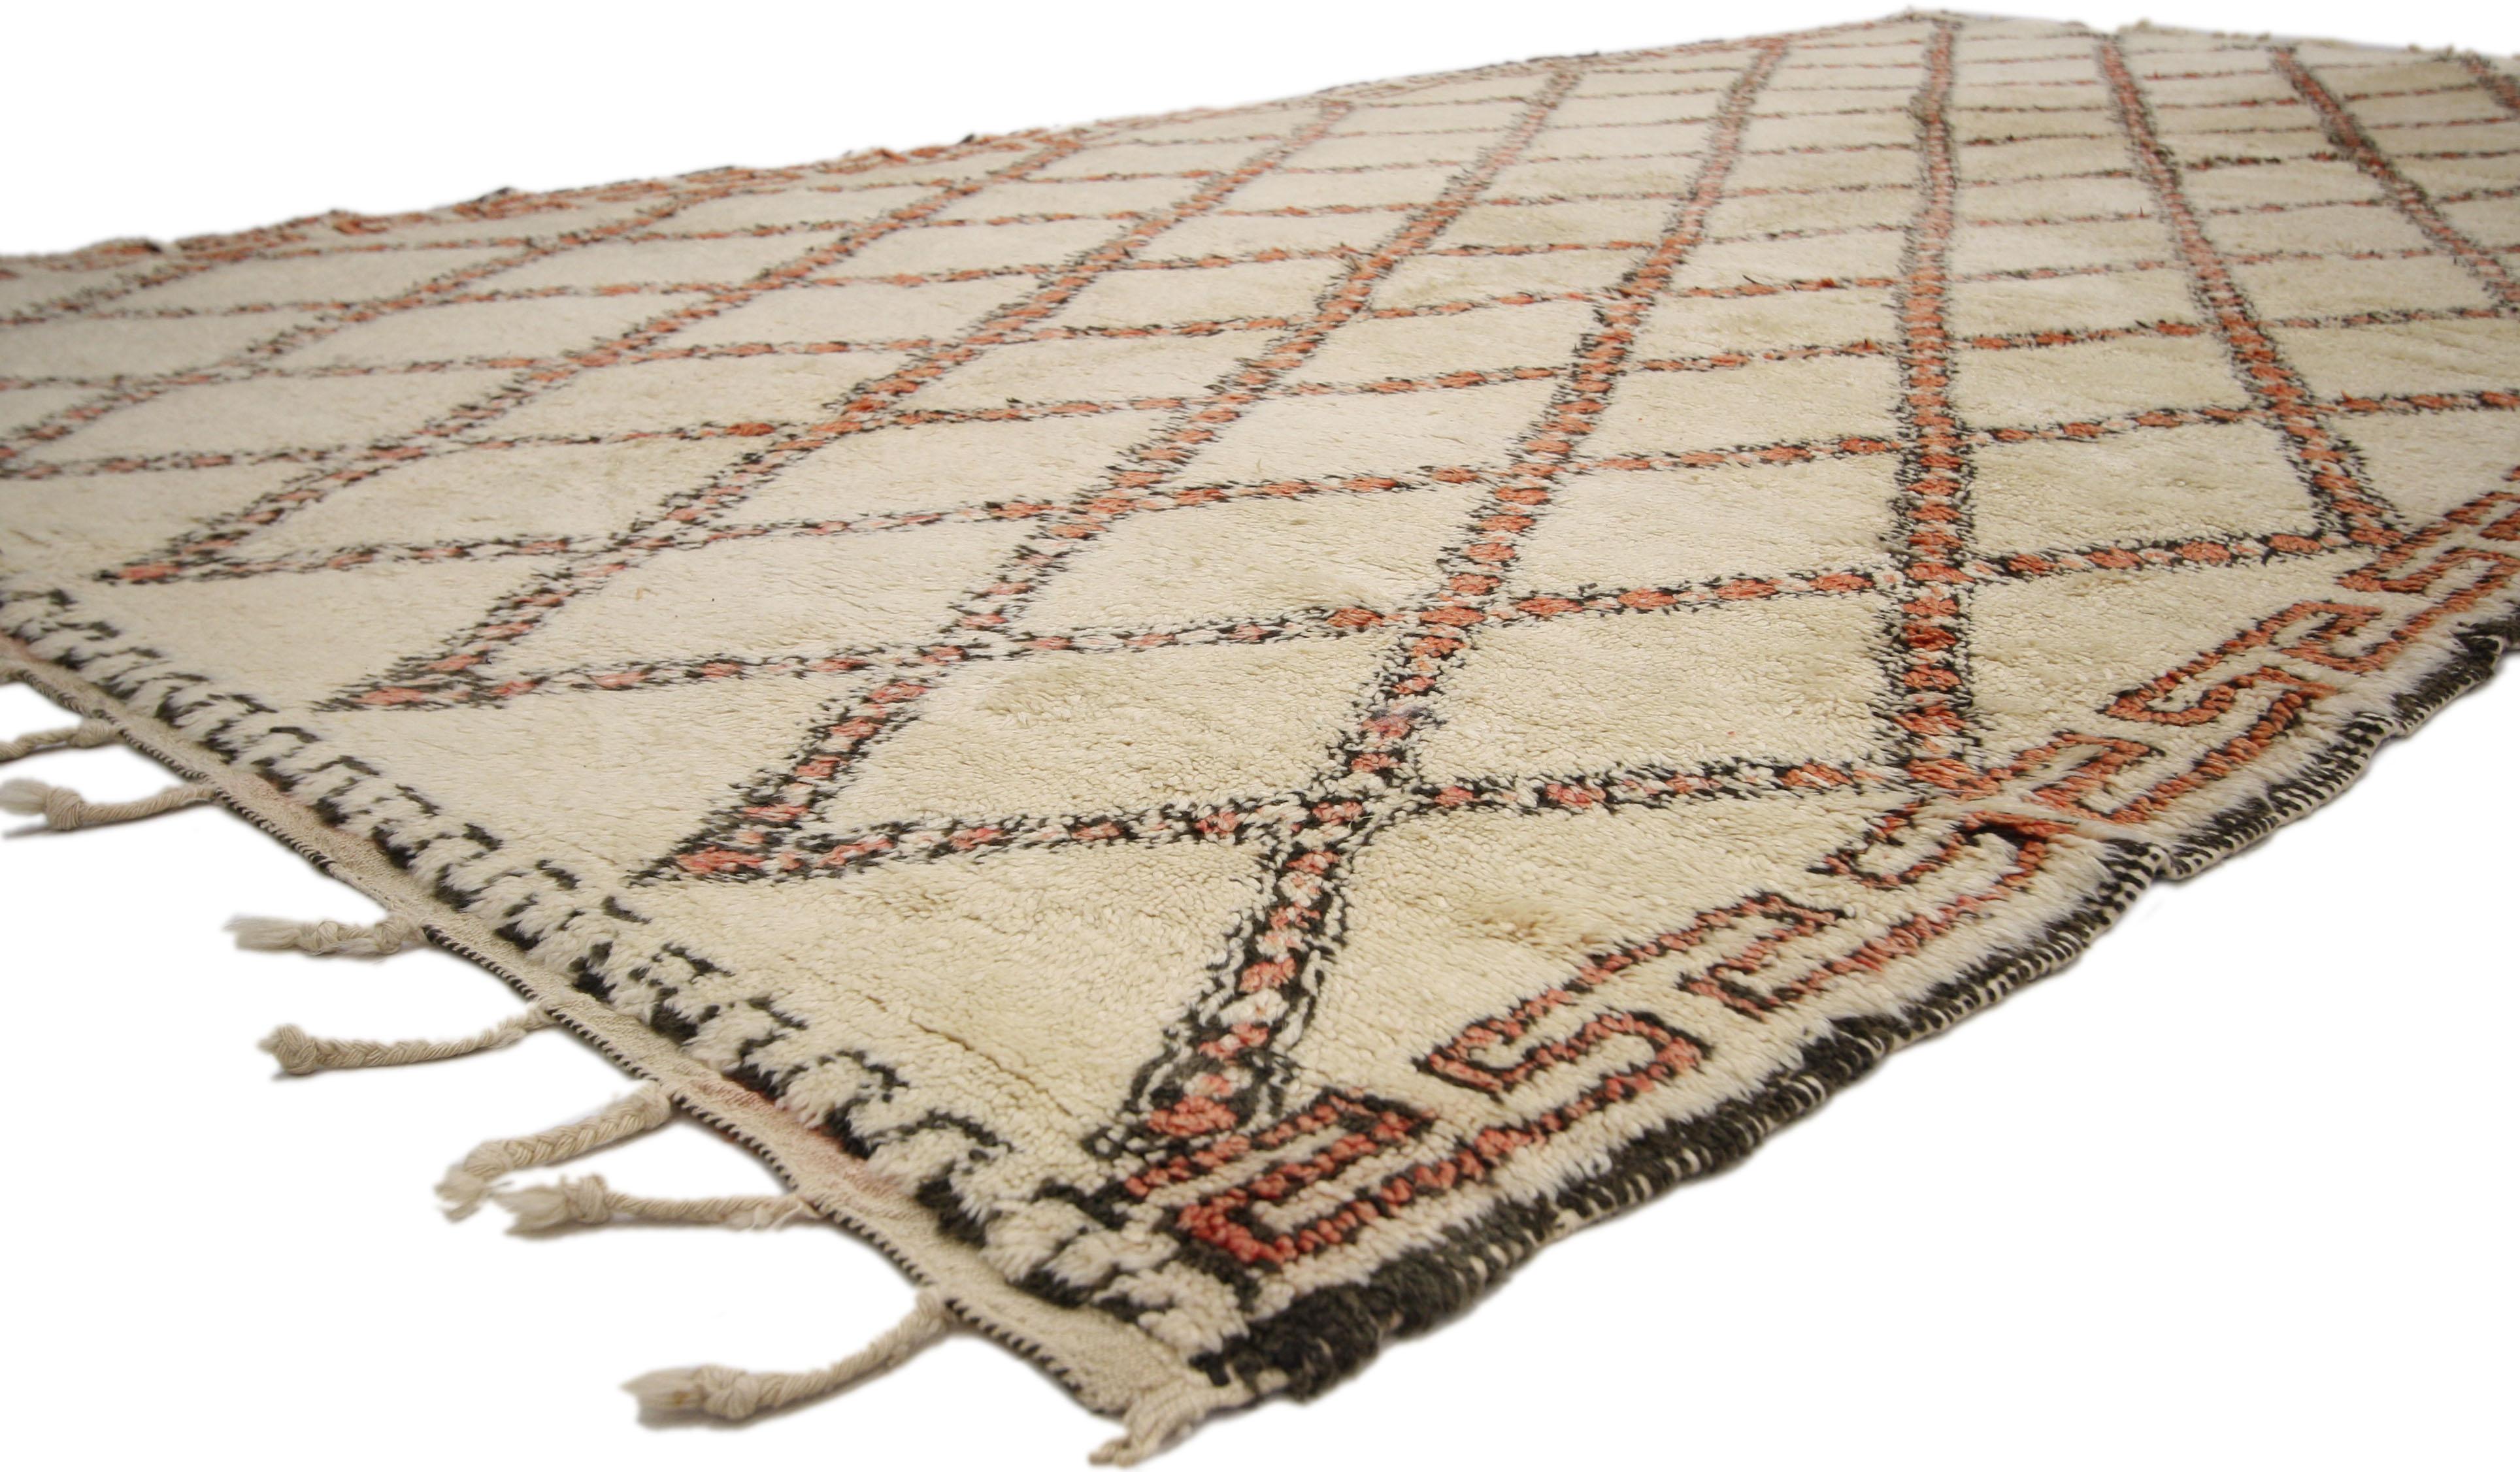 Vintage Beni Ourain Moroccan Rug with Modern Bauhaus Style and Hygge Vibes In Good Condition For Sale In Dallas, TX